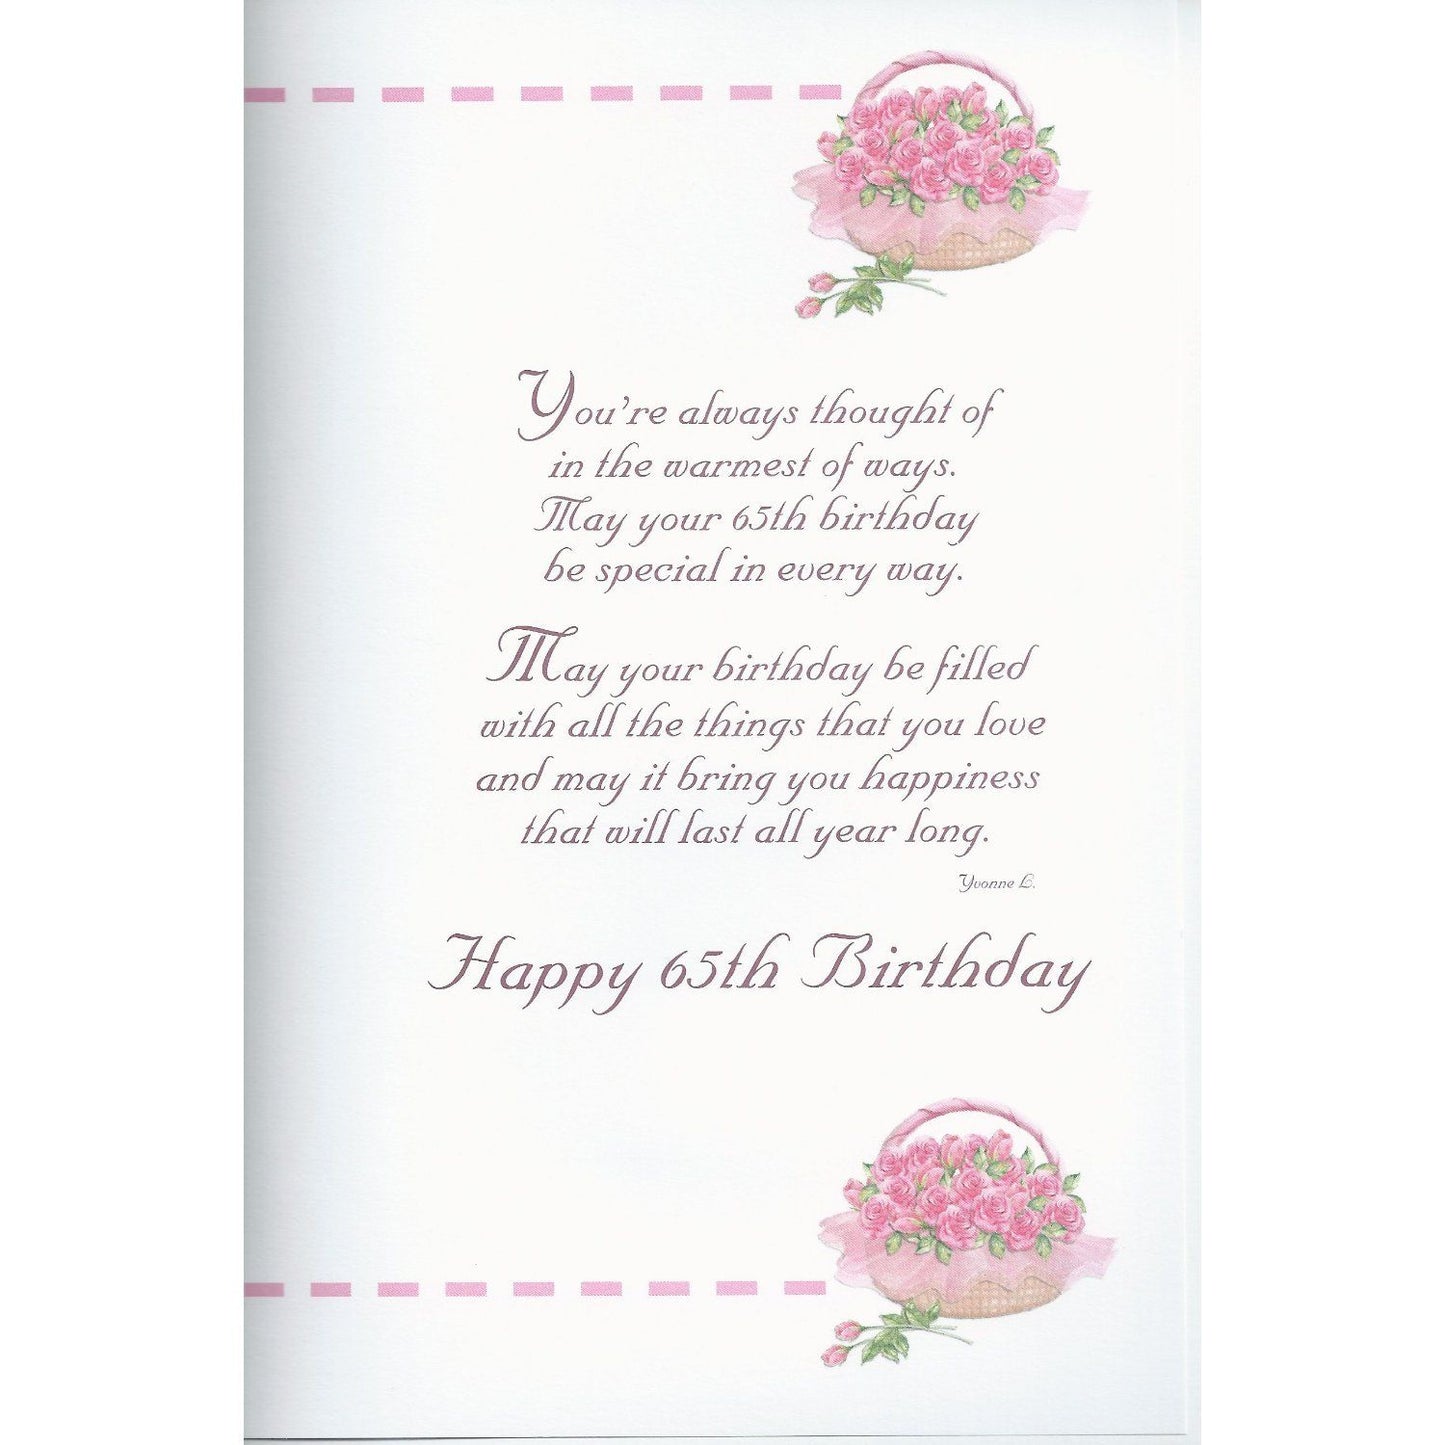 With Best Wishes 65th Happy Birthday Card